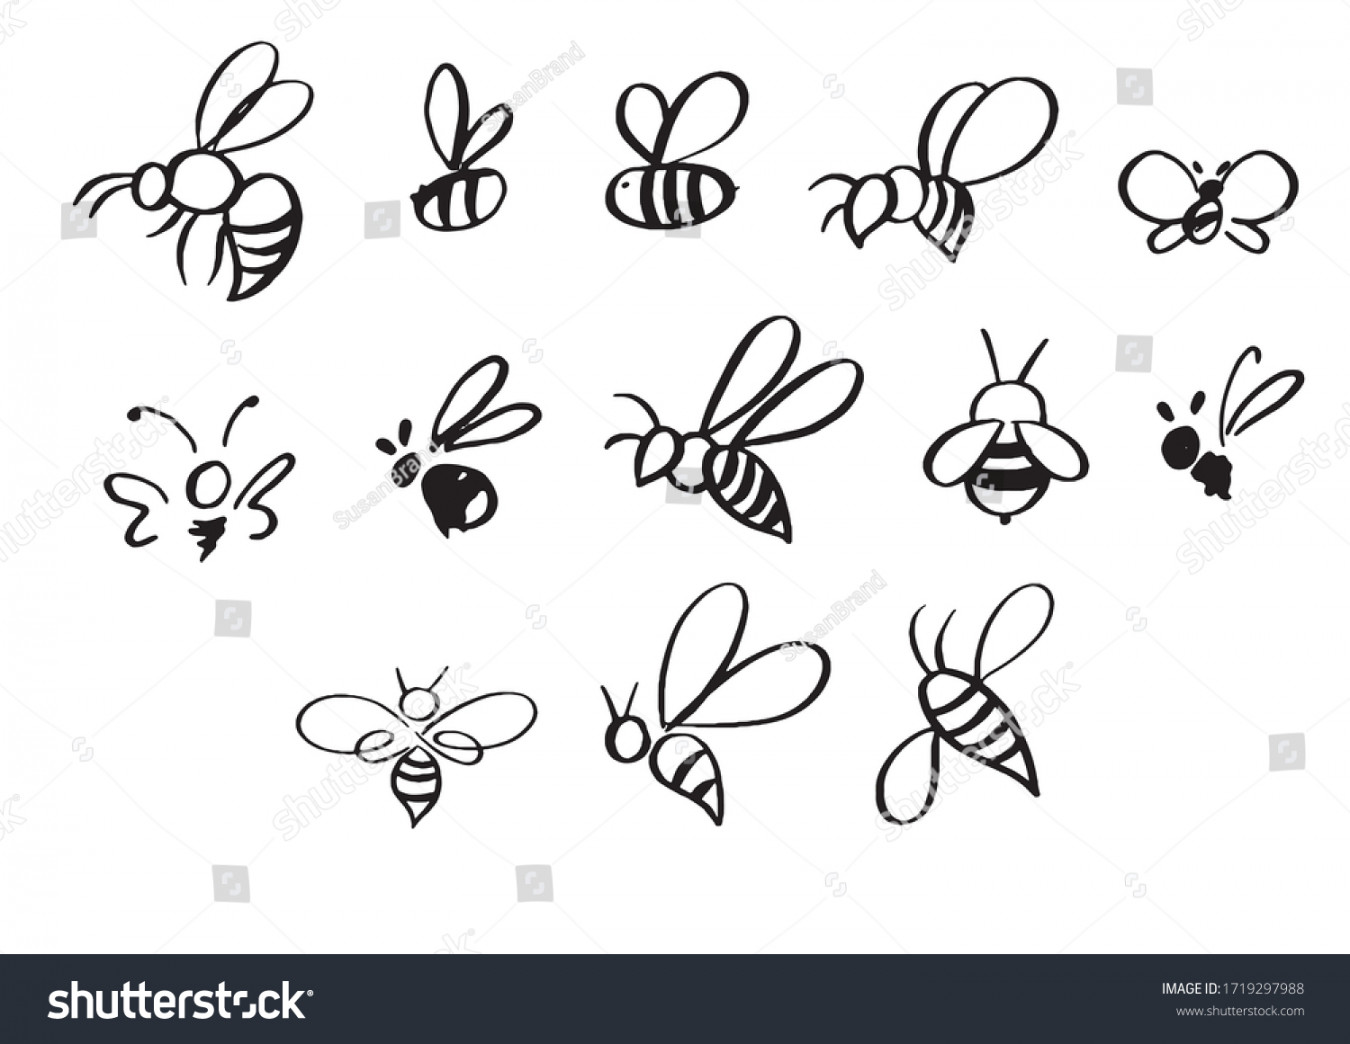 , Simple Bee Drawing Images, Stock Photos, D objects